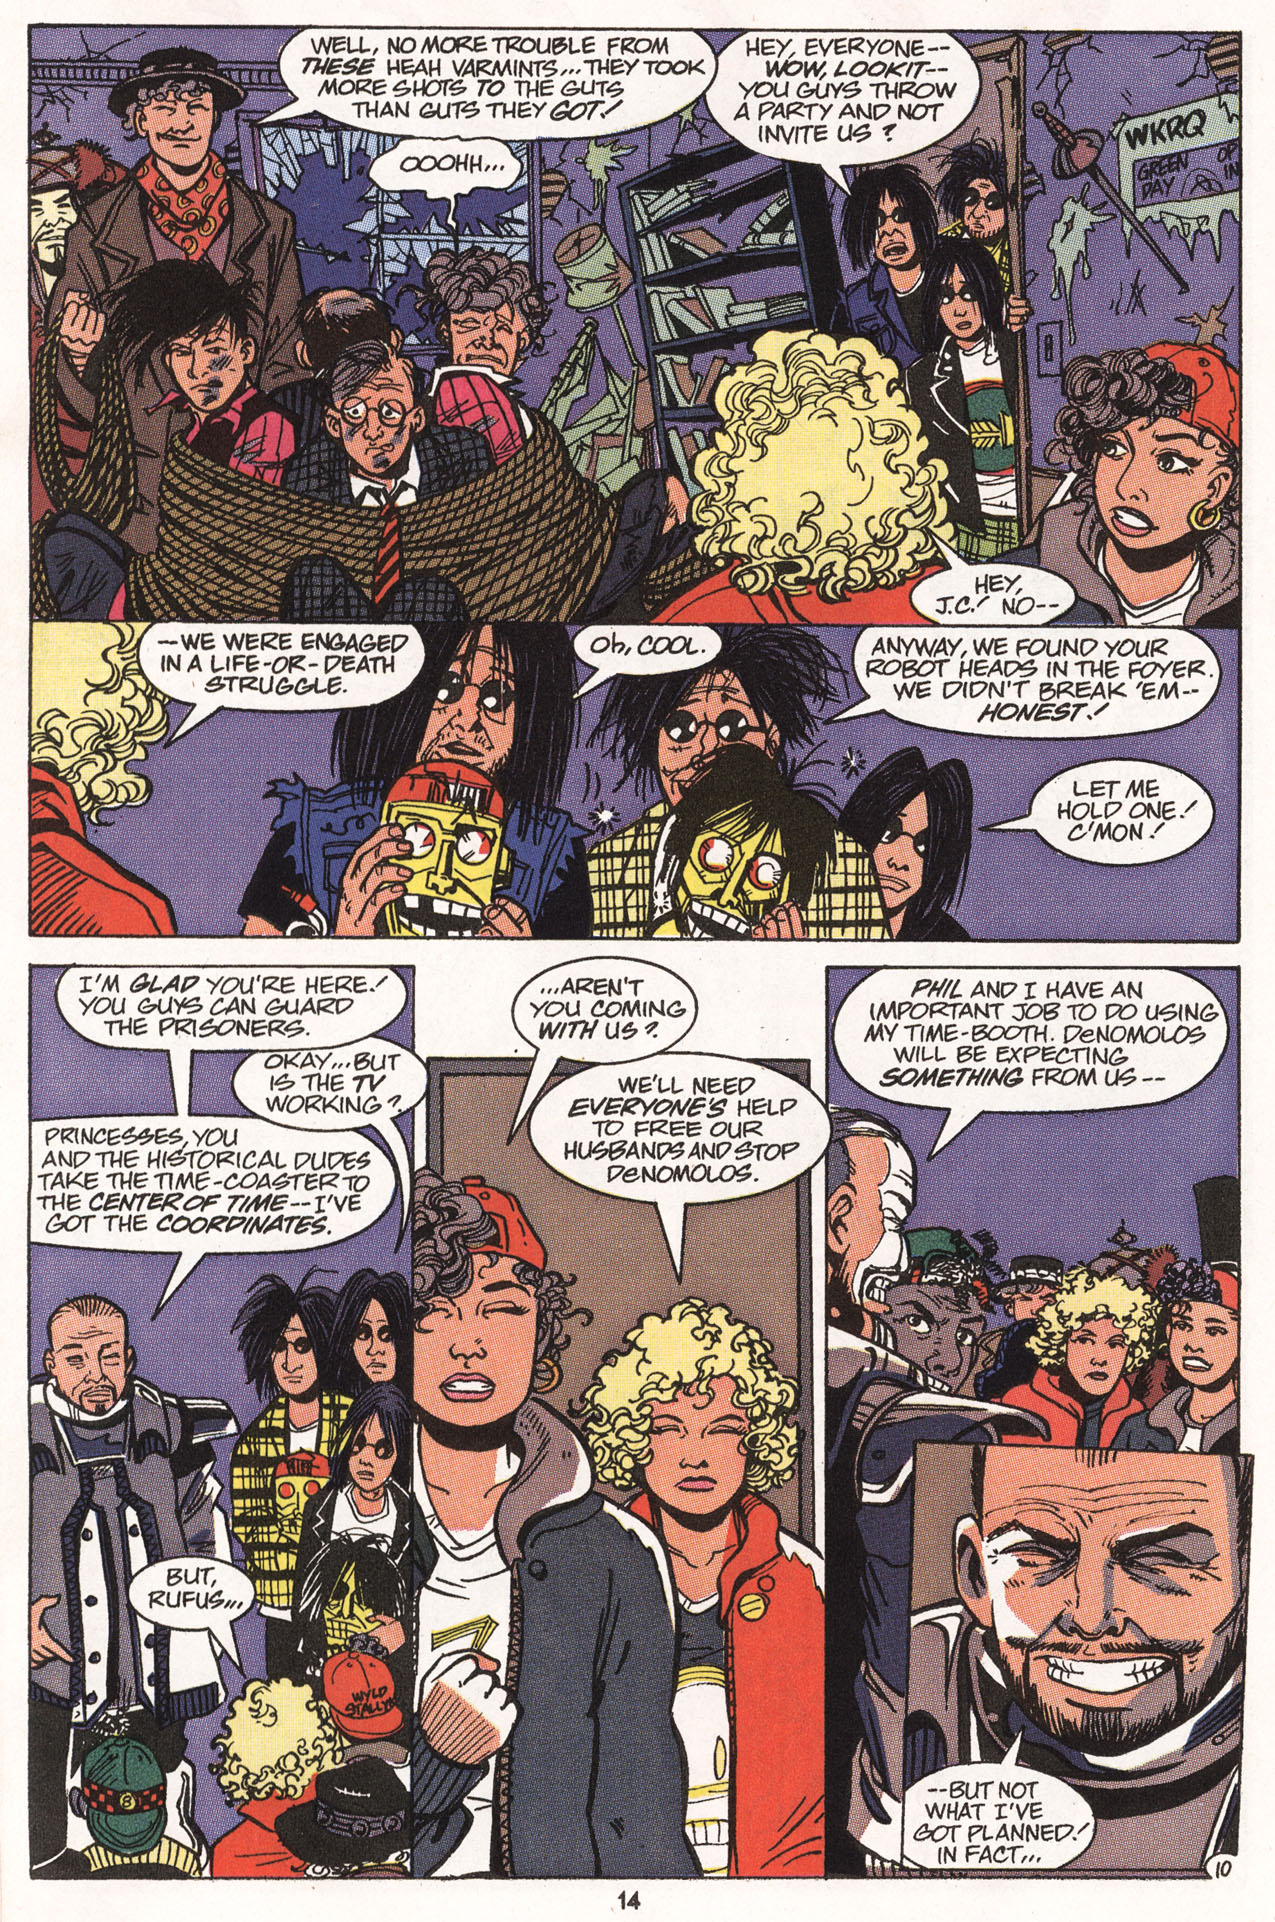 Read online Bill & Ted's Excellent Comic Book comic -  Issue #7 - 16